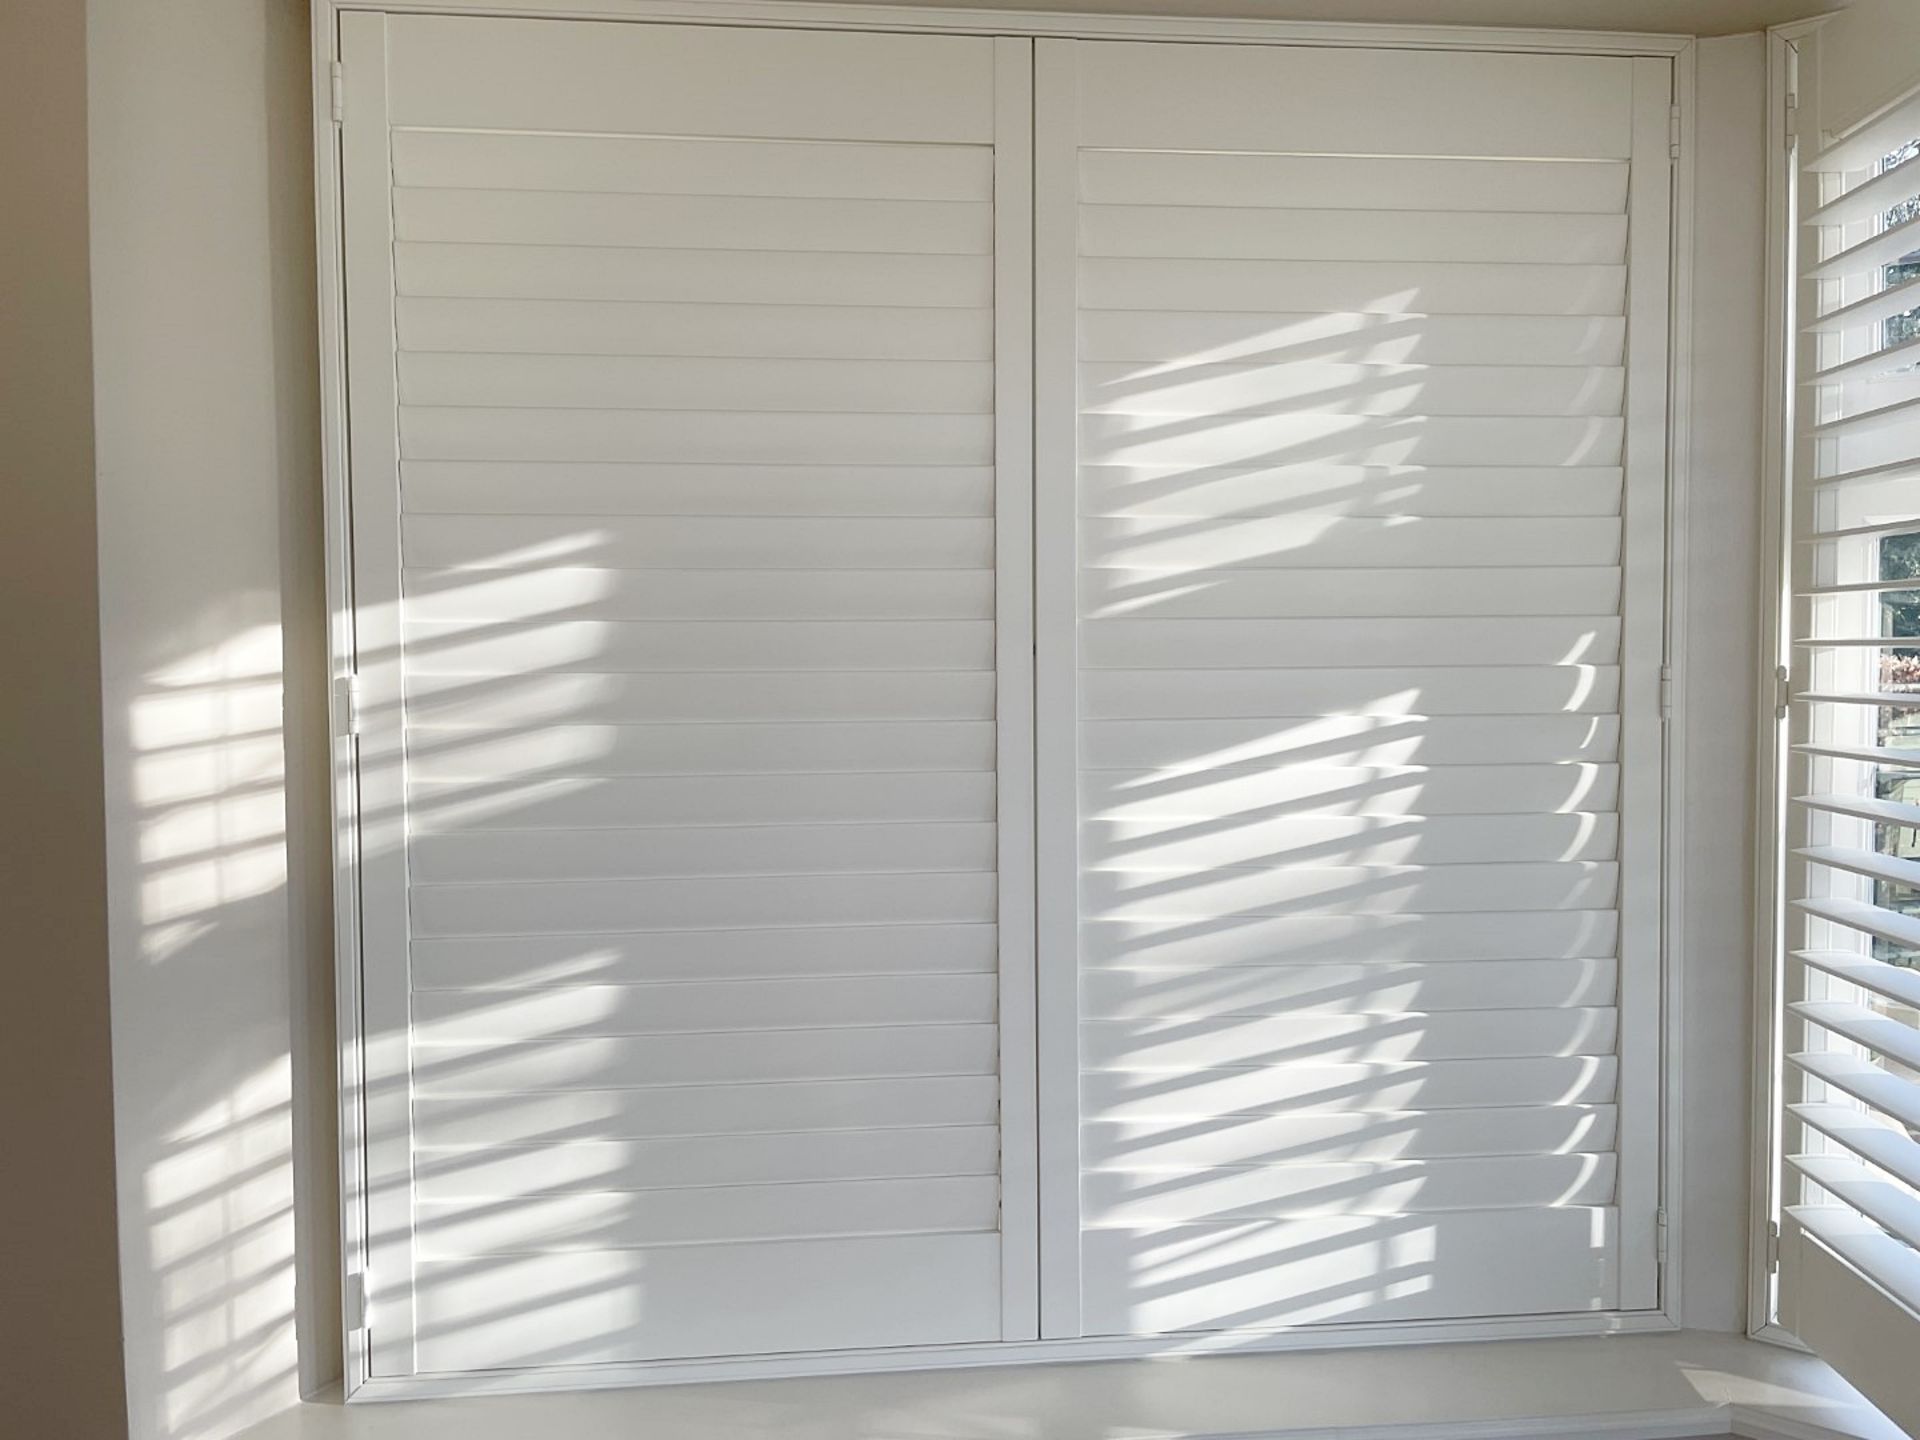 1 x Hardwood Timber Double Glazed Window Frames fitted with Shutter Blinds, In White - Image 3 of 24